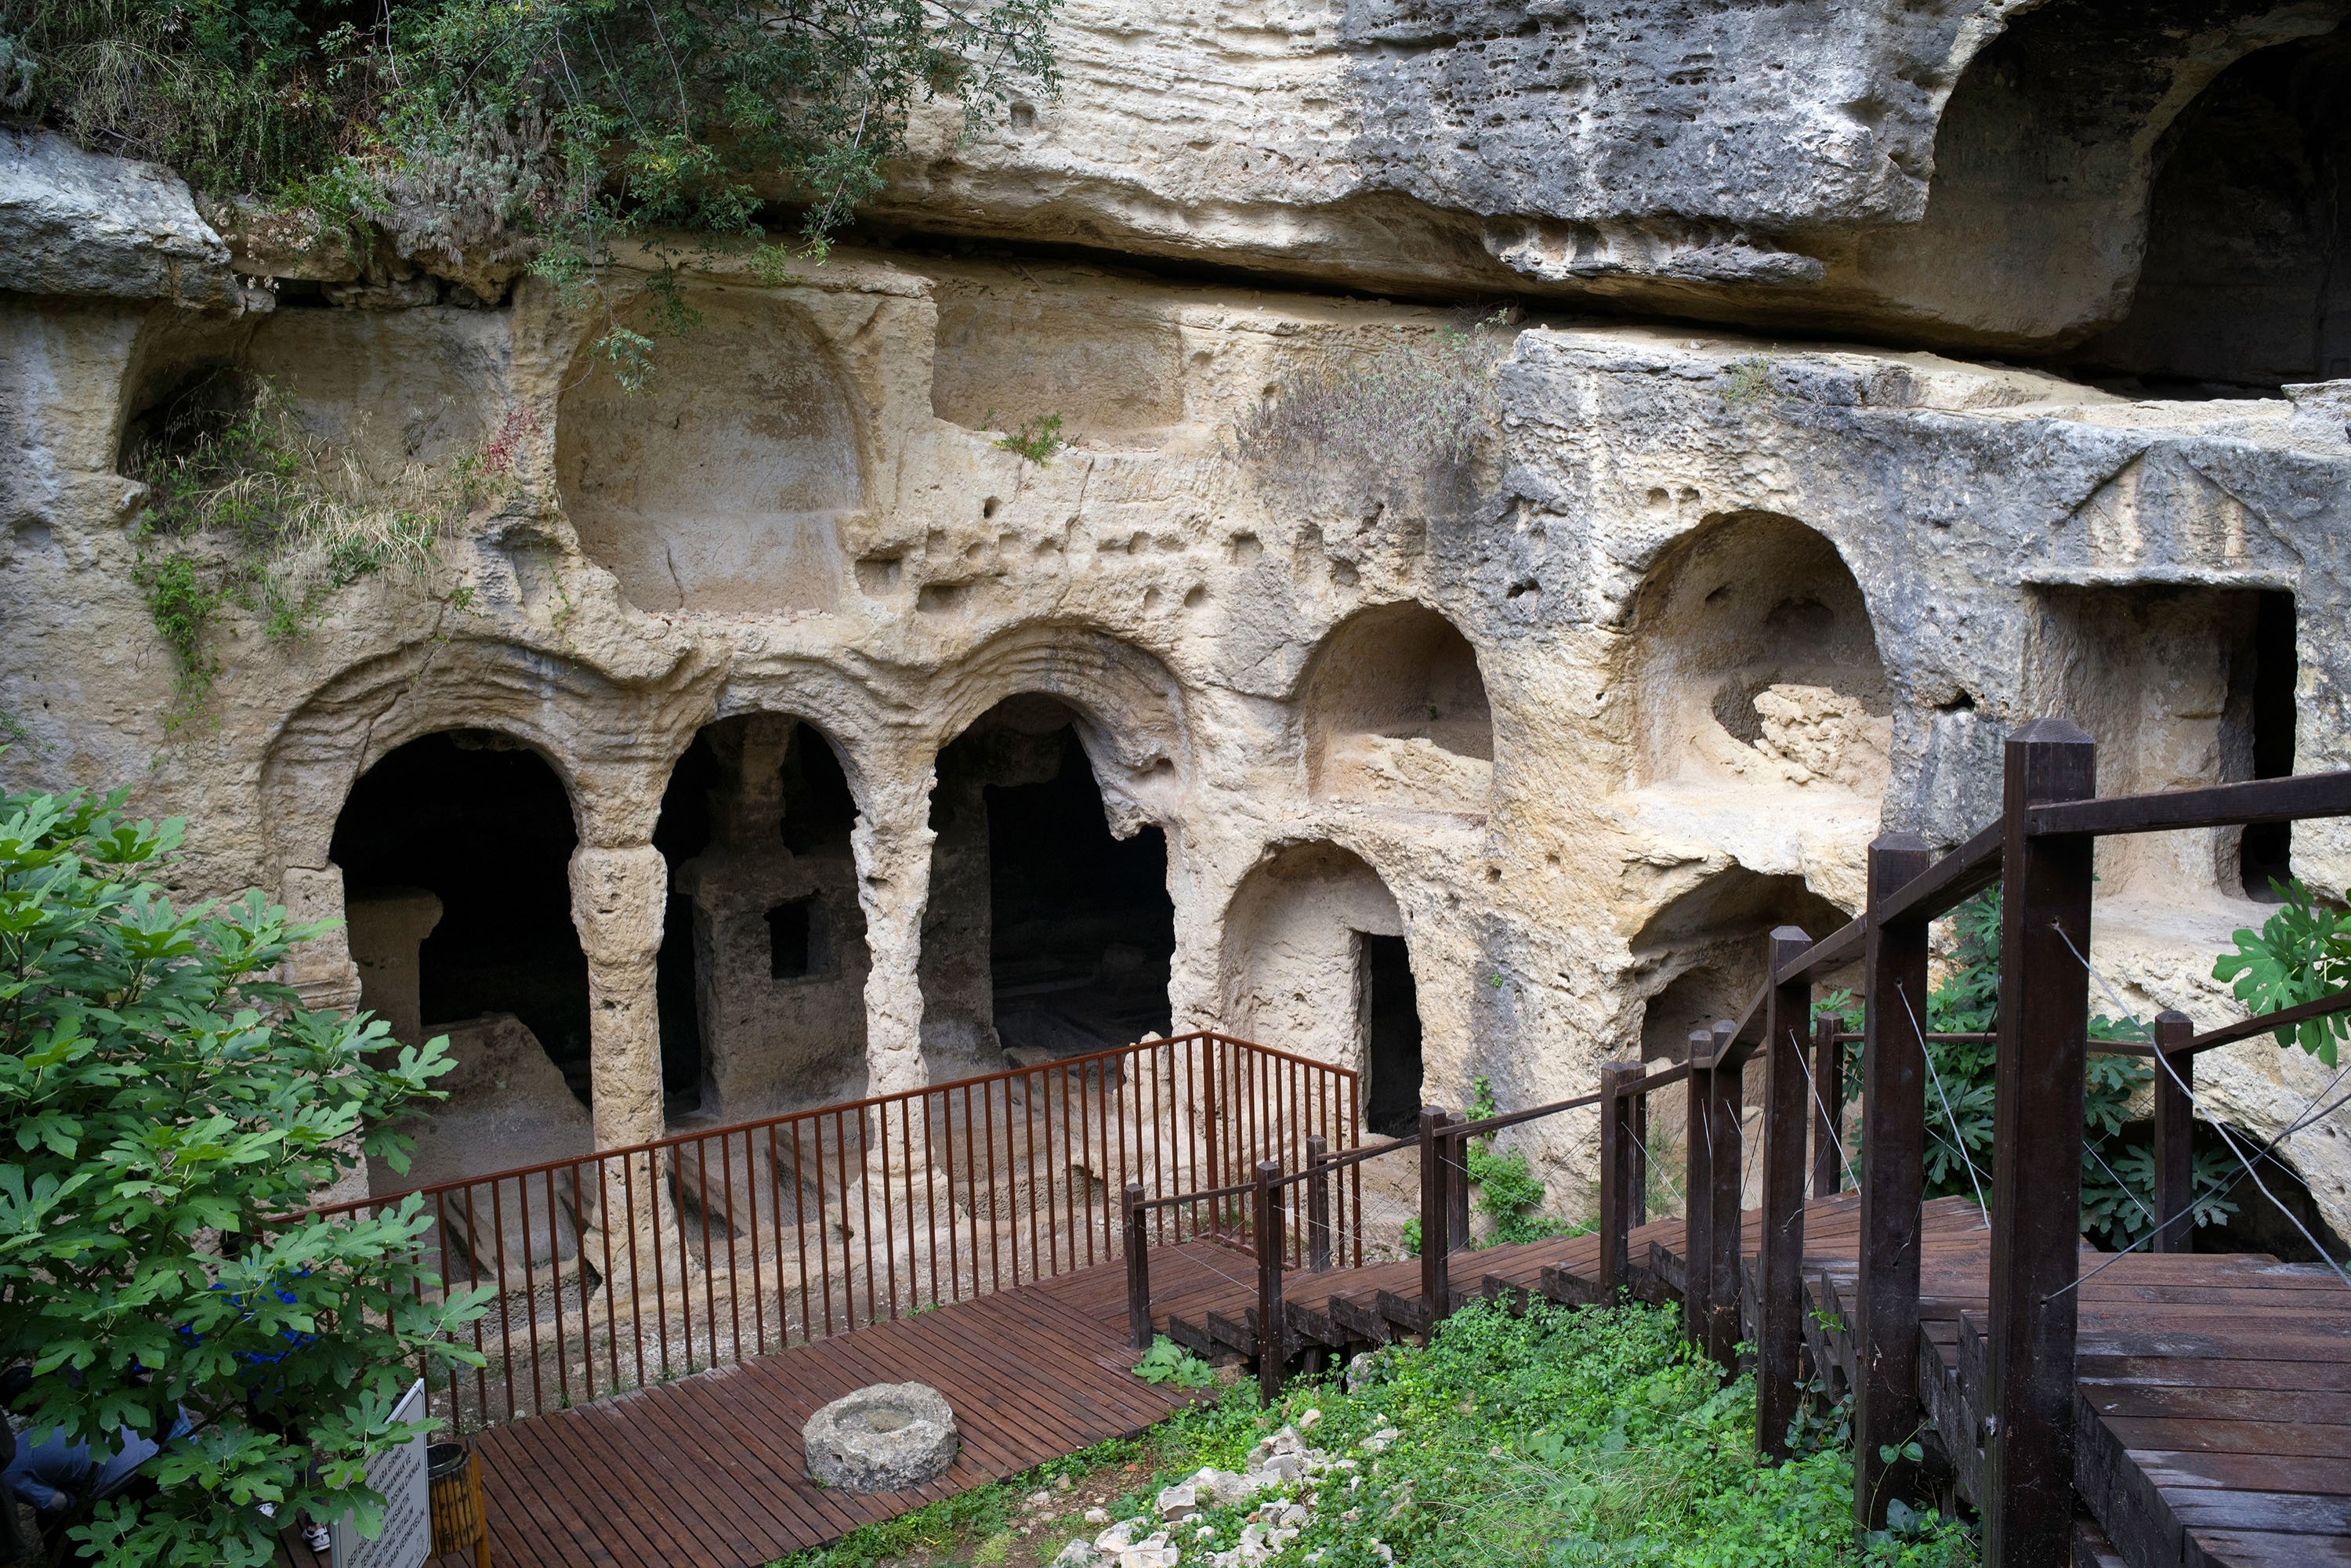 Beşikli Cave where 12 rock tombs are located near the ancient Roman Titus Tunnel, in the Samandağ district of Hatay, Turkey. (Shutterstock Photo)